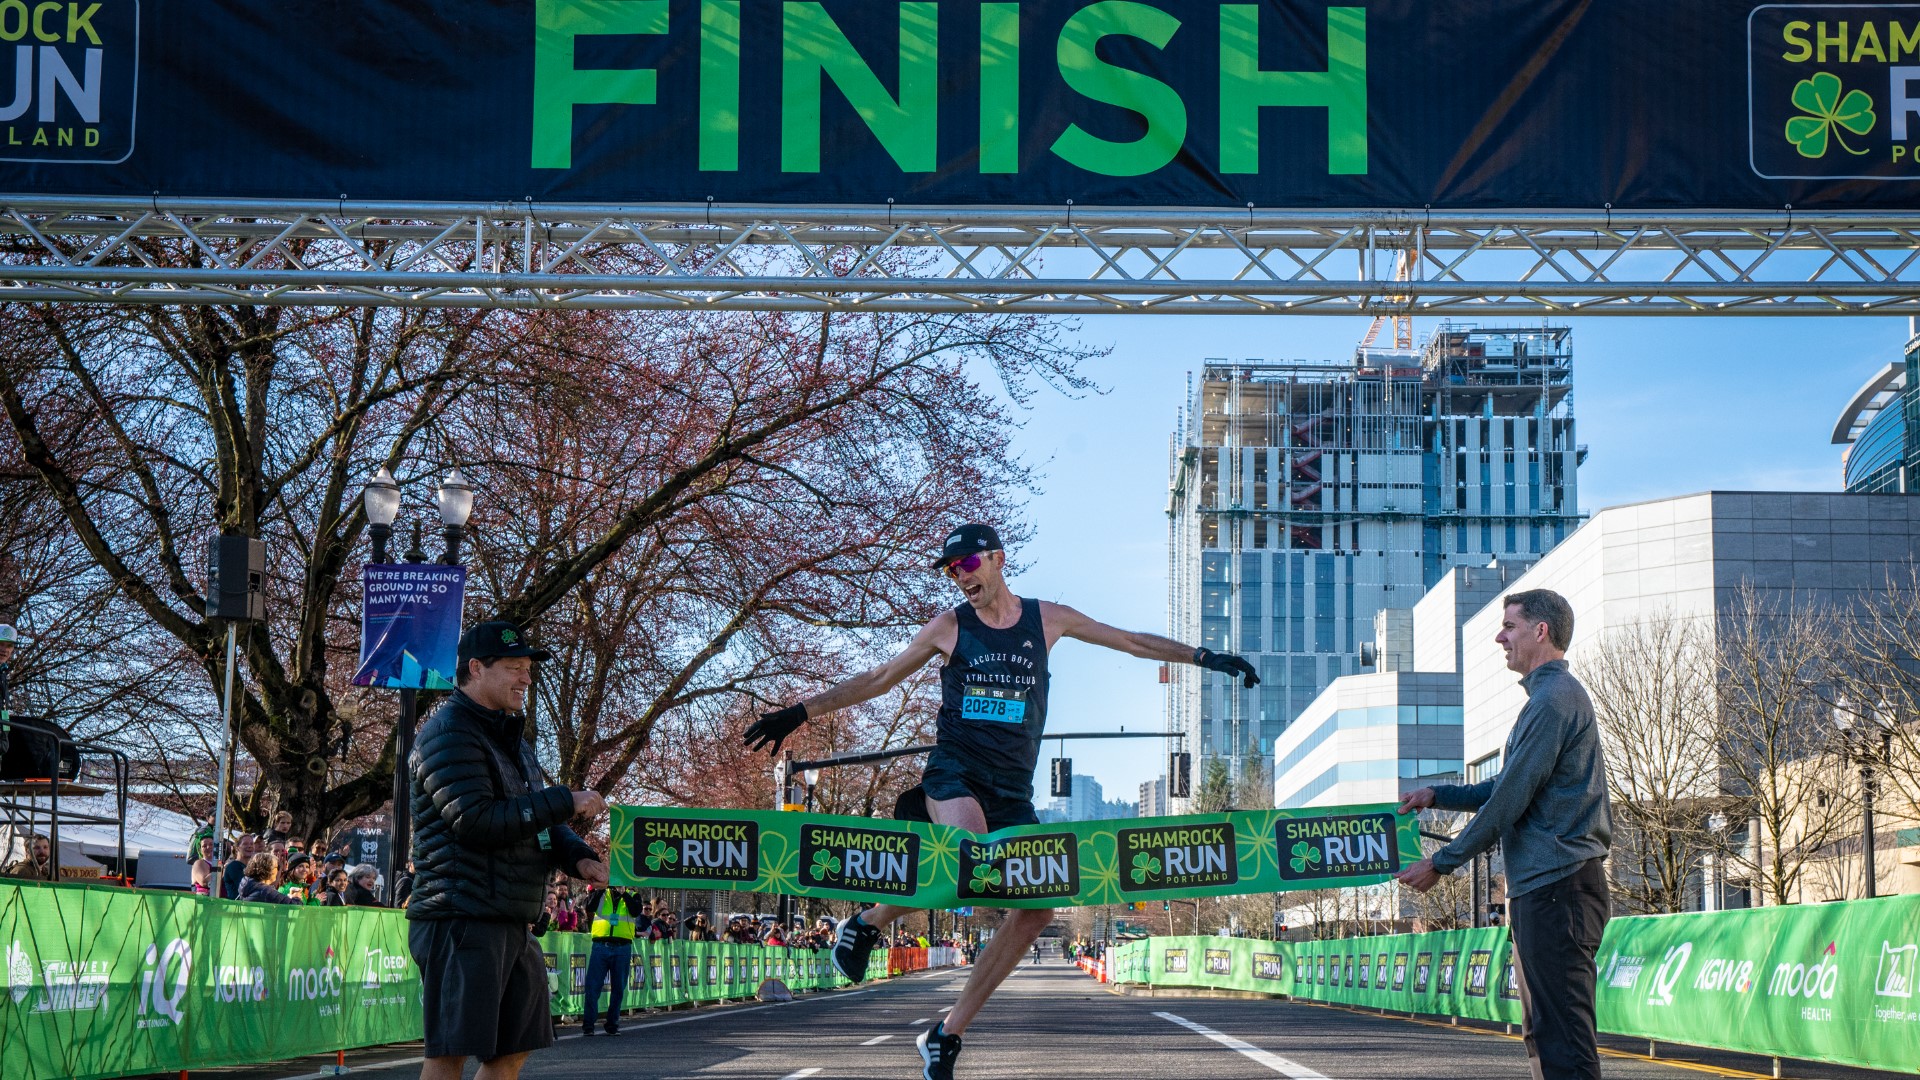 The Shamrock Run will bring 20,000 runners to the downtown area this weekend. It's Portland's biggest running event, dating back to 1979.